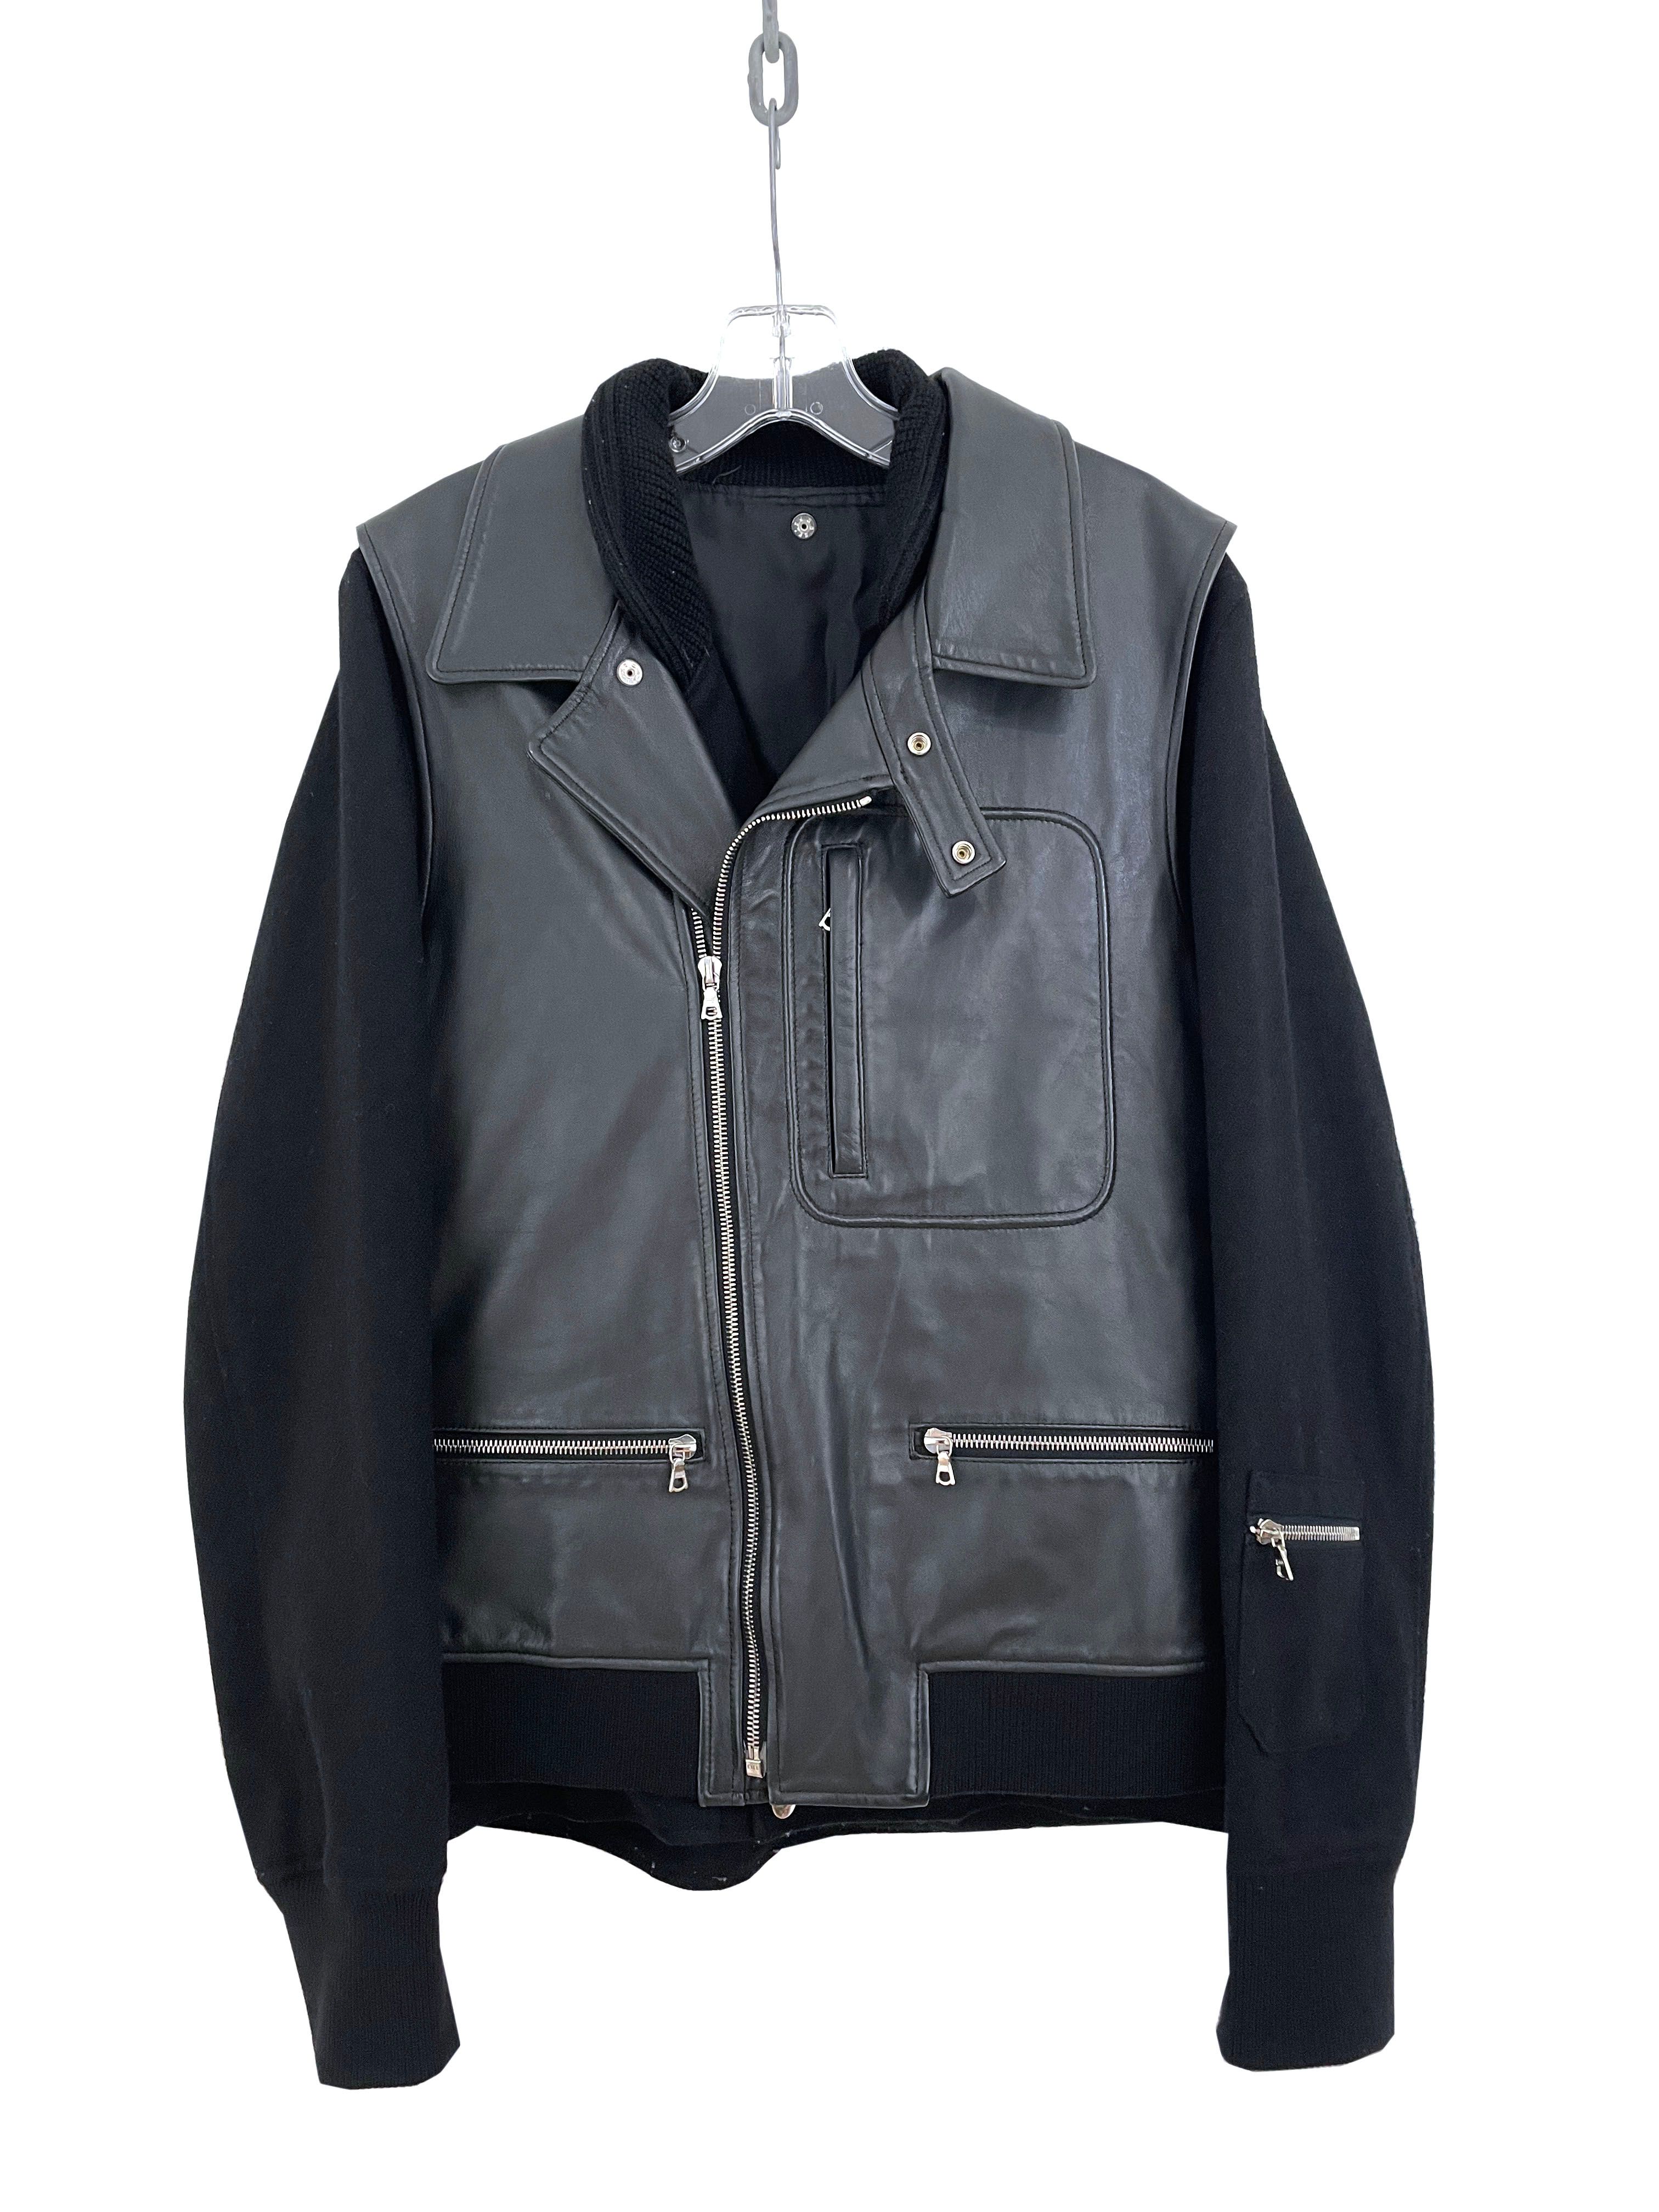 Undercover AW07 Hybrid Leather Jacket | Grailed